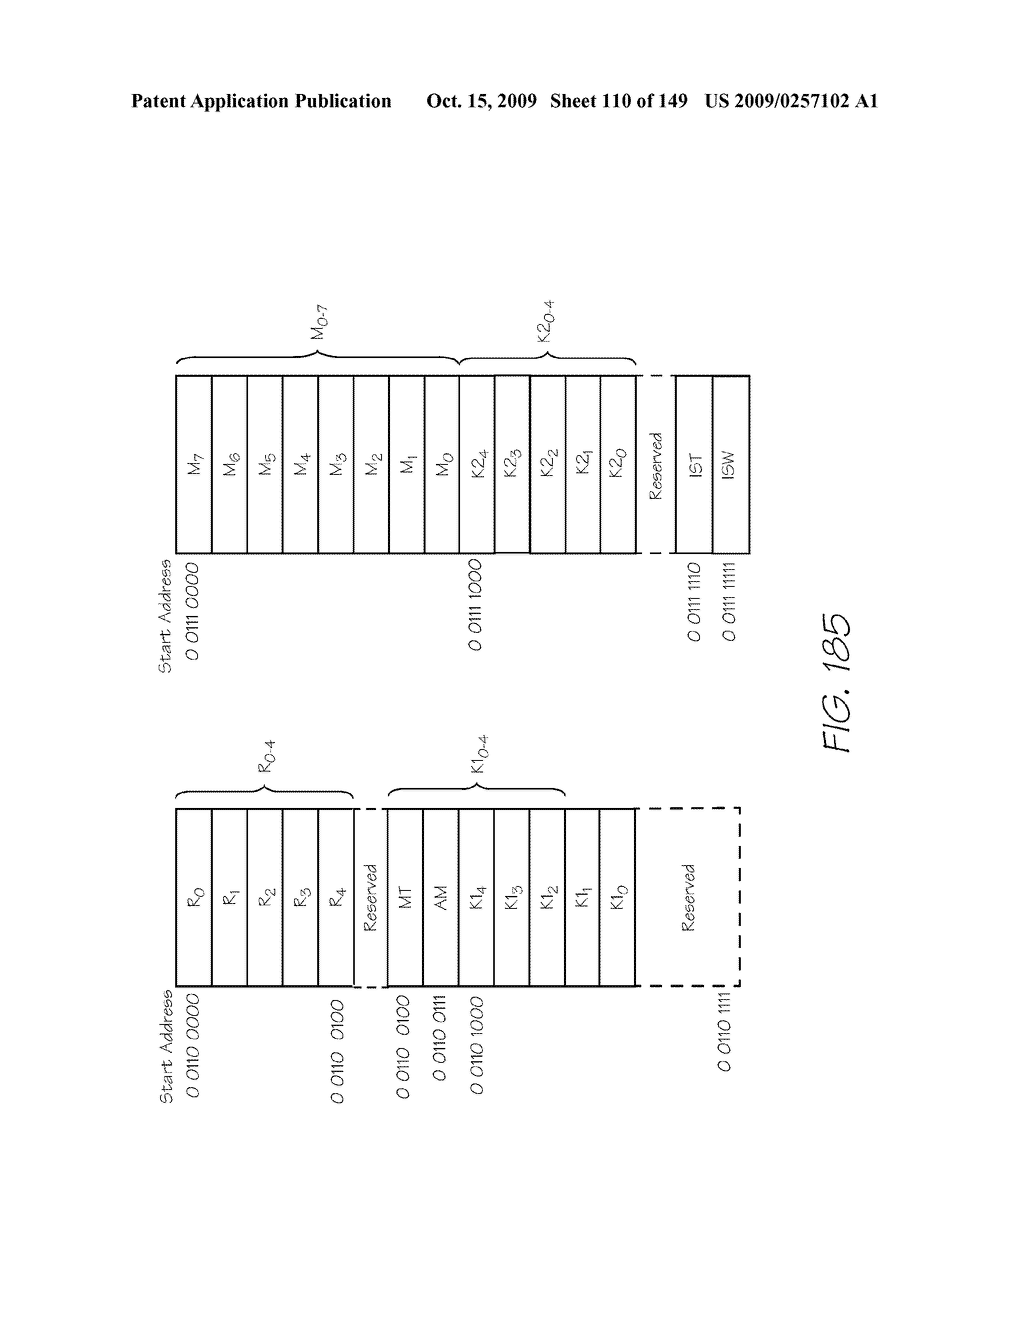 IMAGE PROCESSING APPARATUS HAVING CARD READER FOR APPLYING EFFECTS STORED ON A CARD TO A STORED IMAGE - diagram, schematic, and image 111